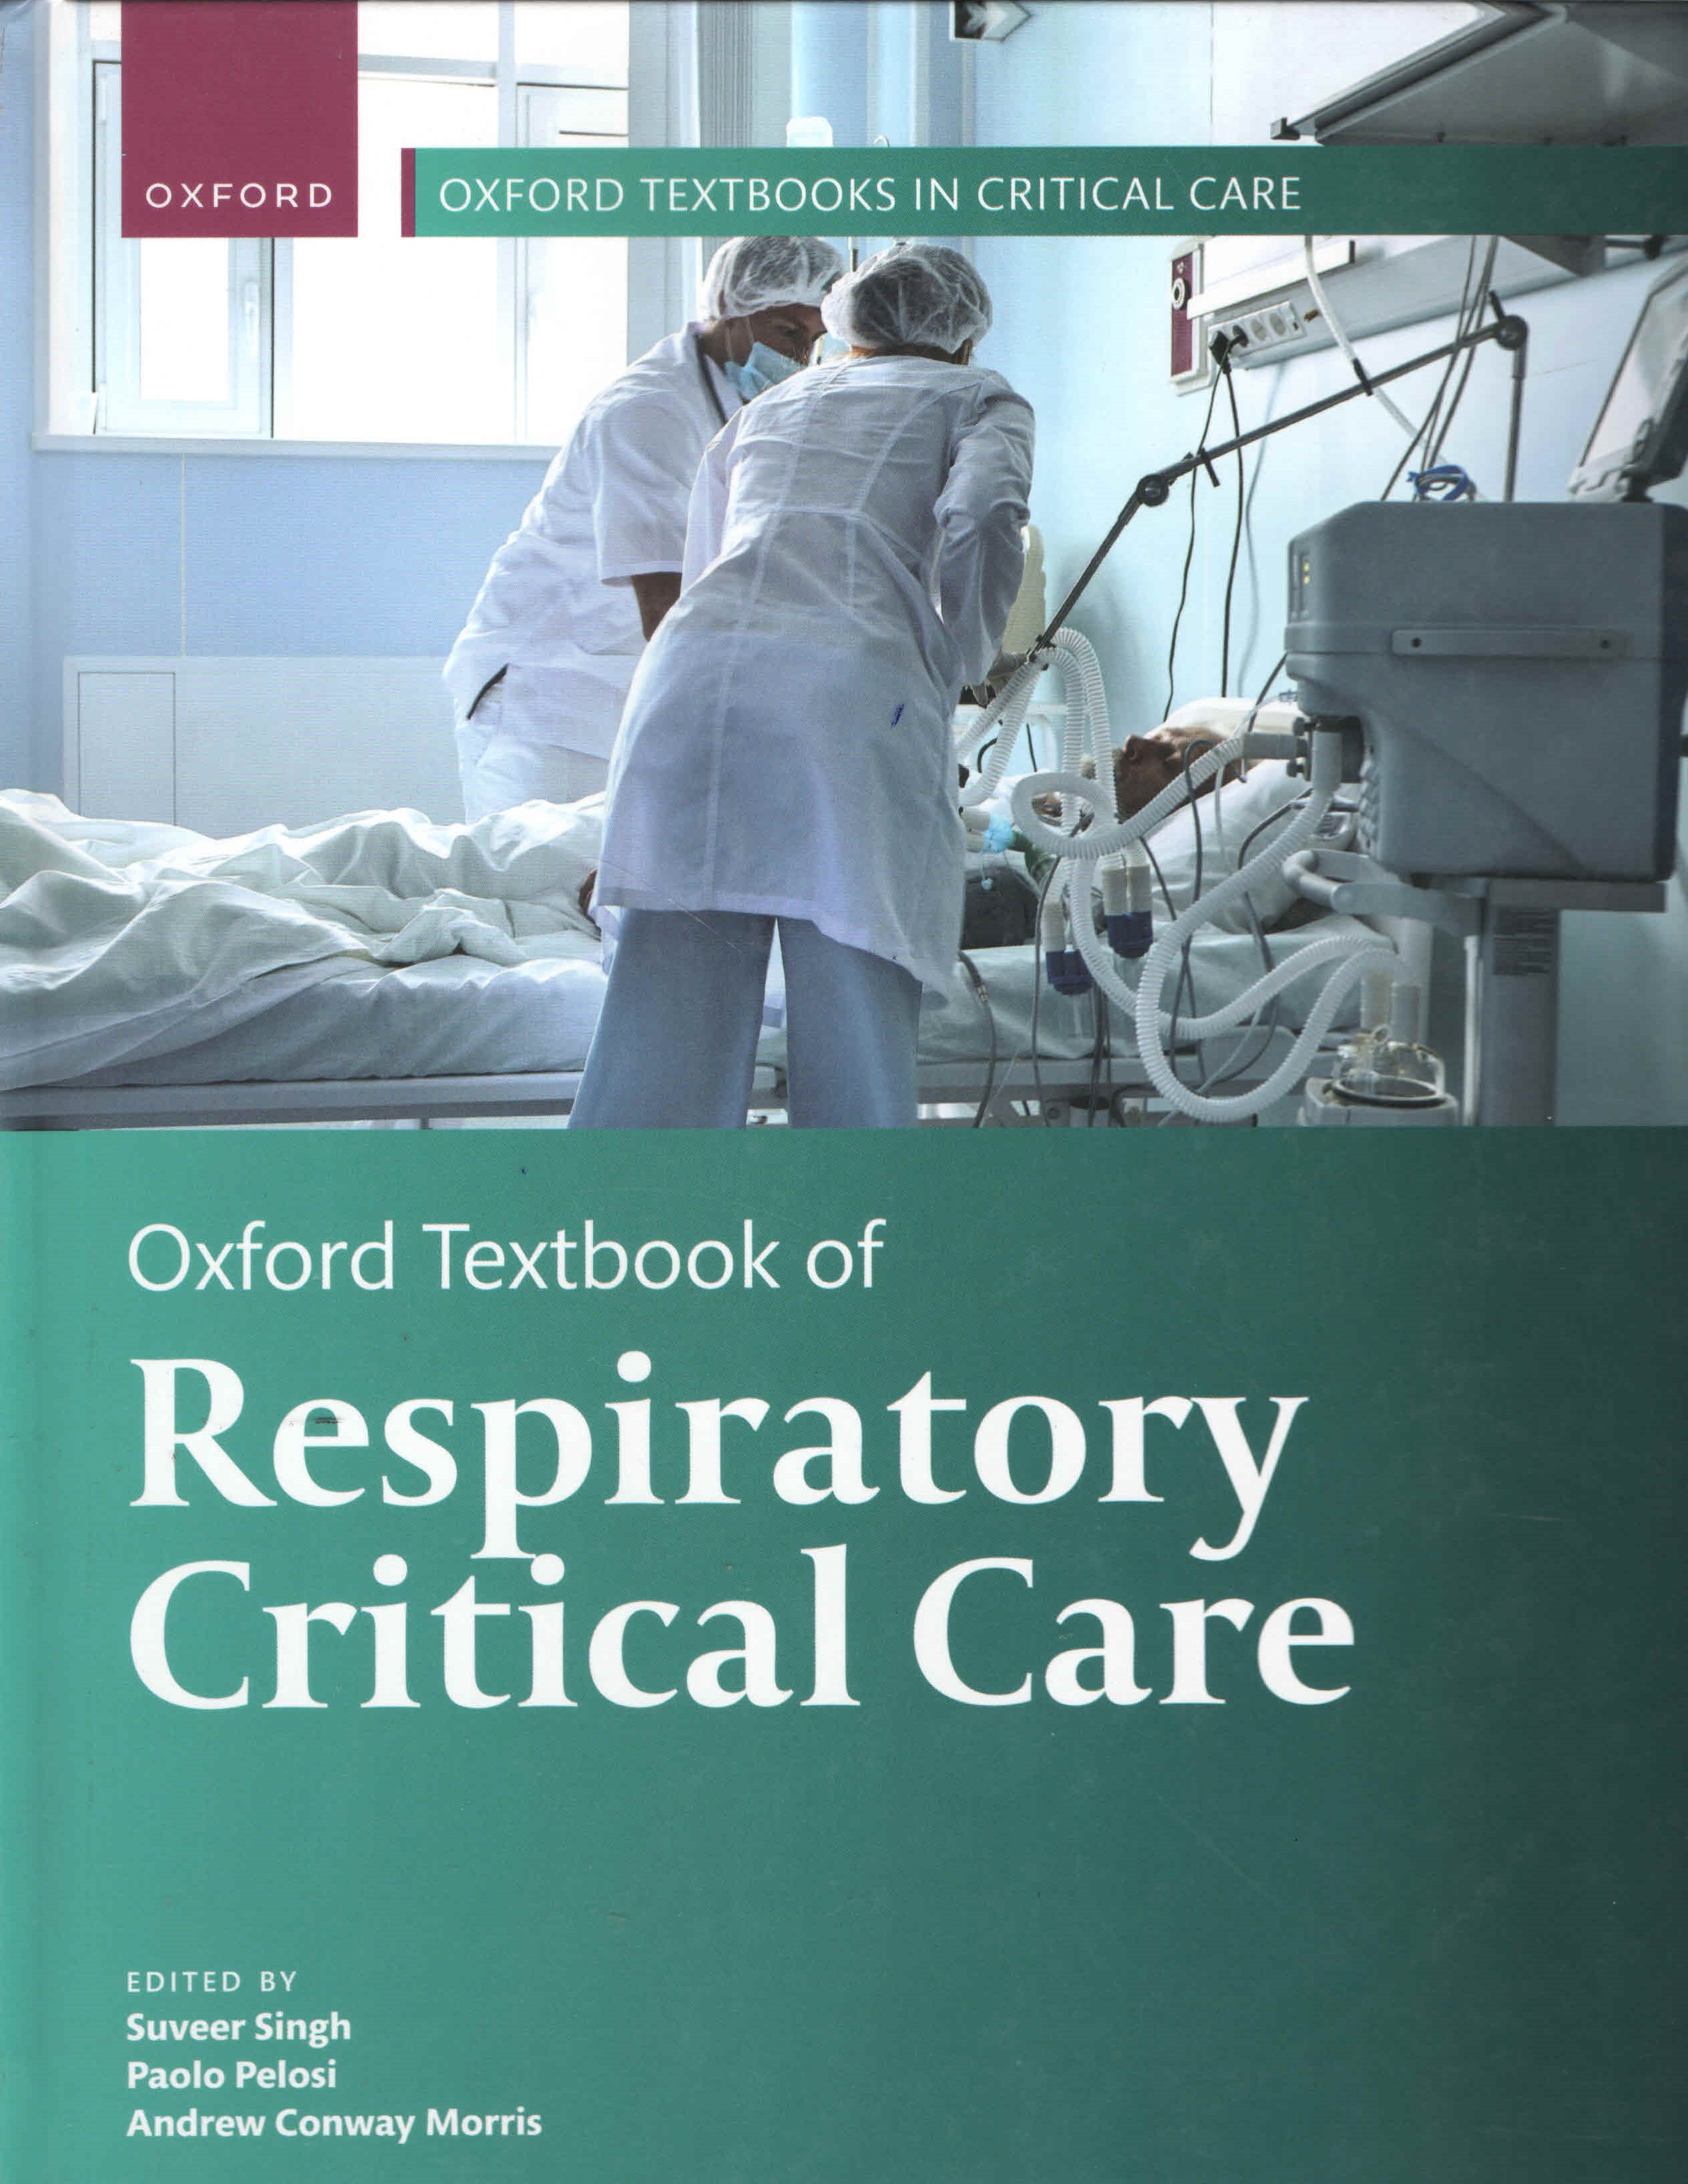 

exclusive-publishers/oxford-university-press/oxford-textbook-of-respiratory-critical-care-9780198766438